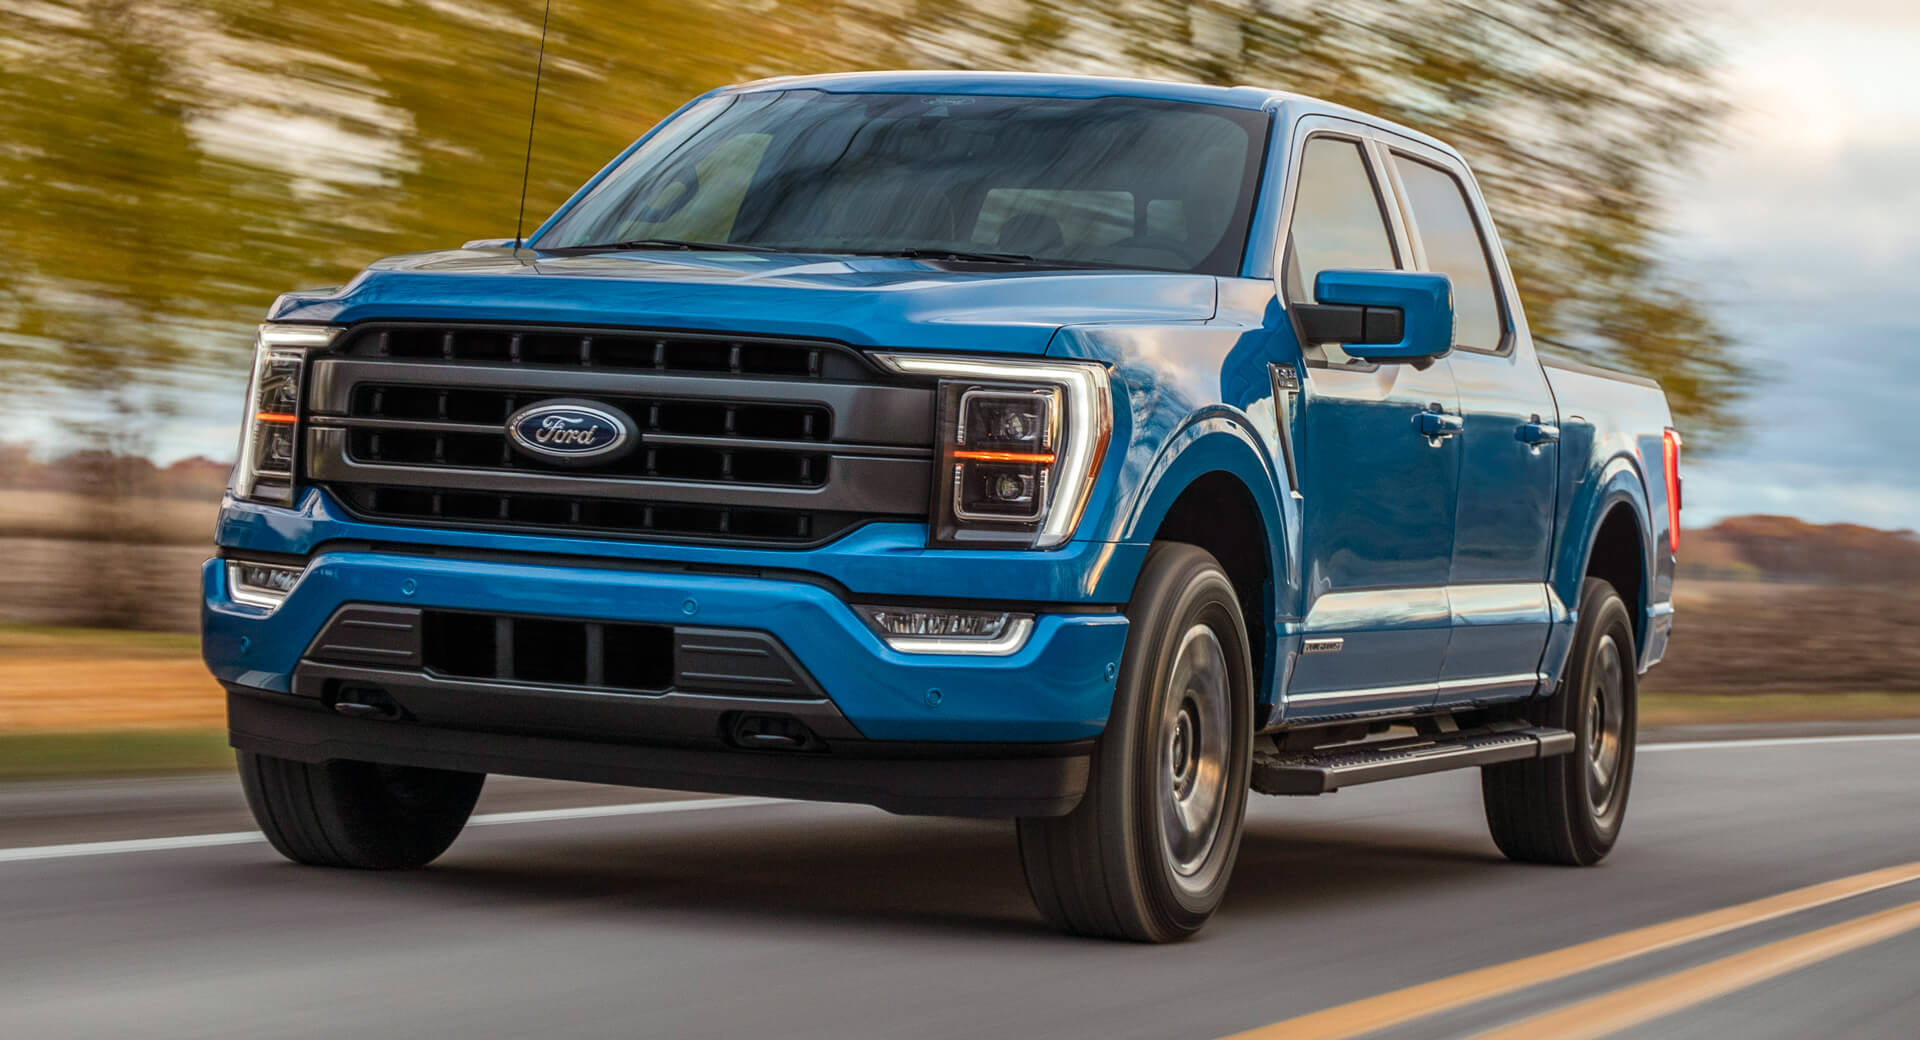 2021 Ford F-150 PowerBoost Hybrid Has Best In Class EPA-Rated Fuel